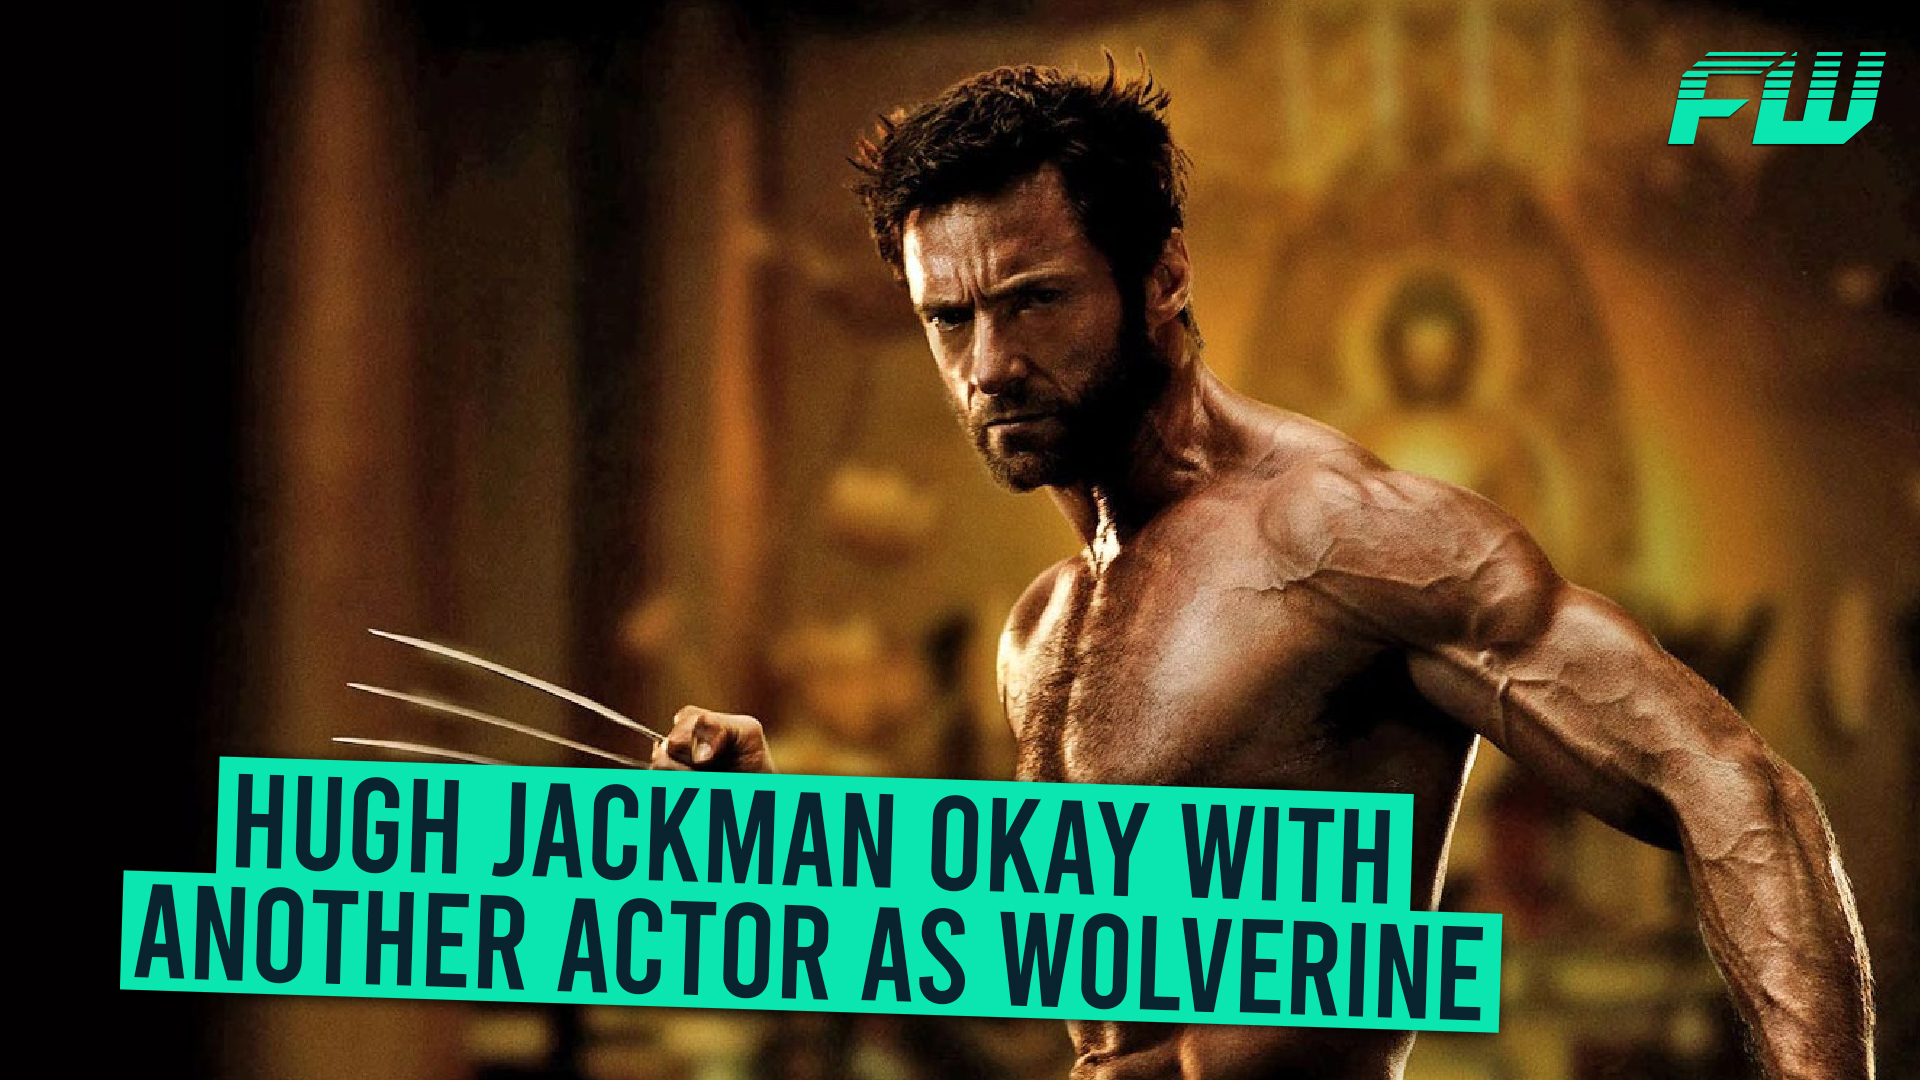 Hugh Jackman Okay with Another Actor as Wolverine